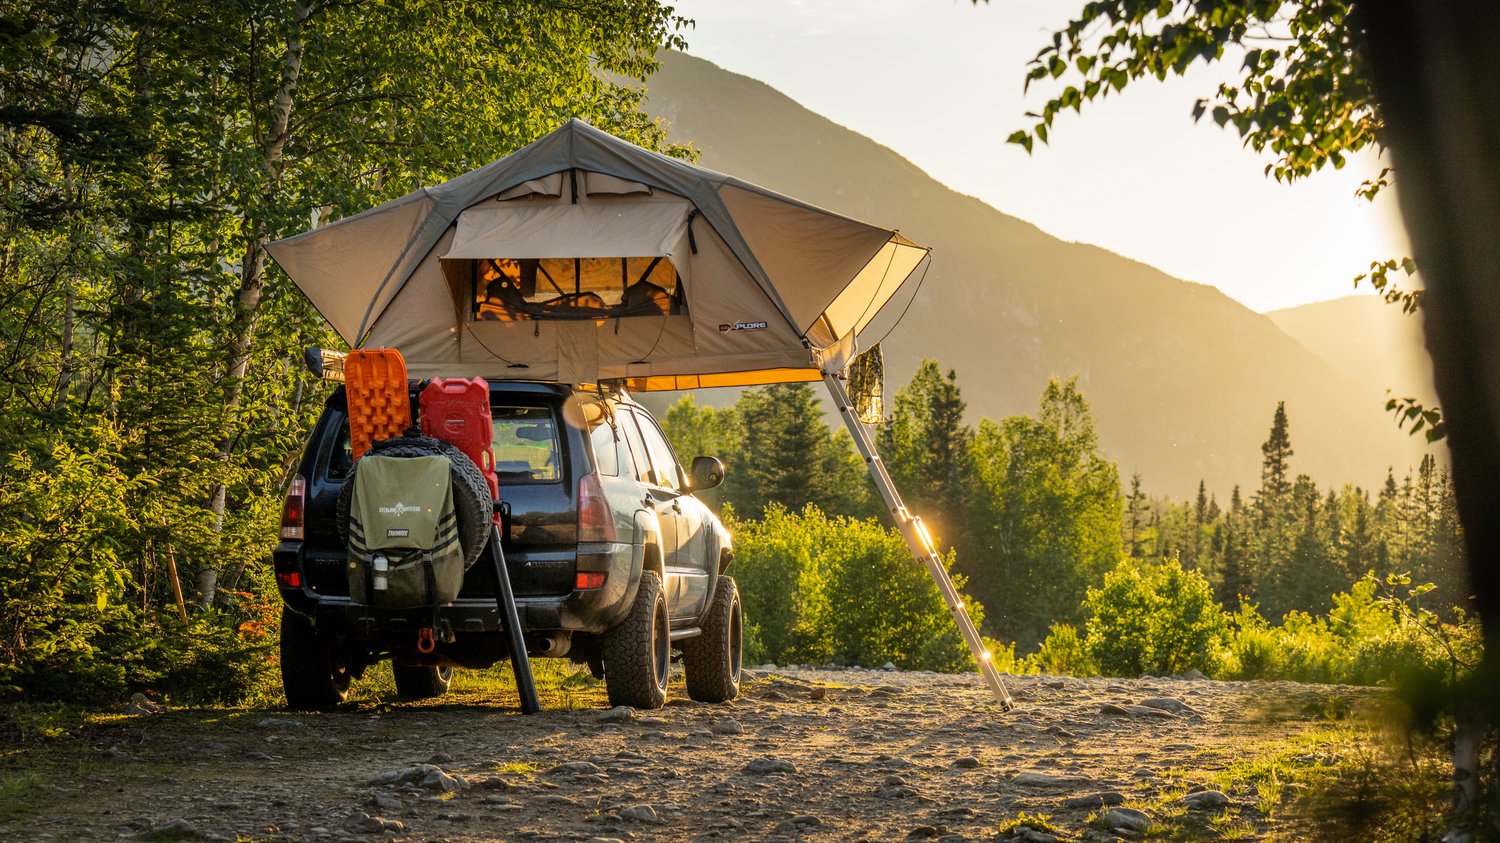 Camping 4x4 tent on roof